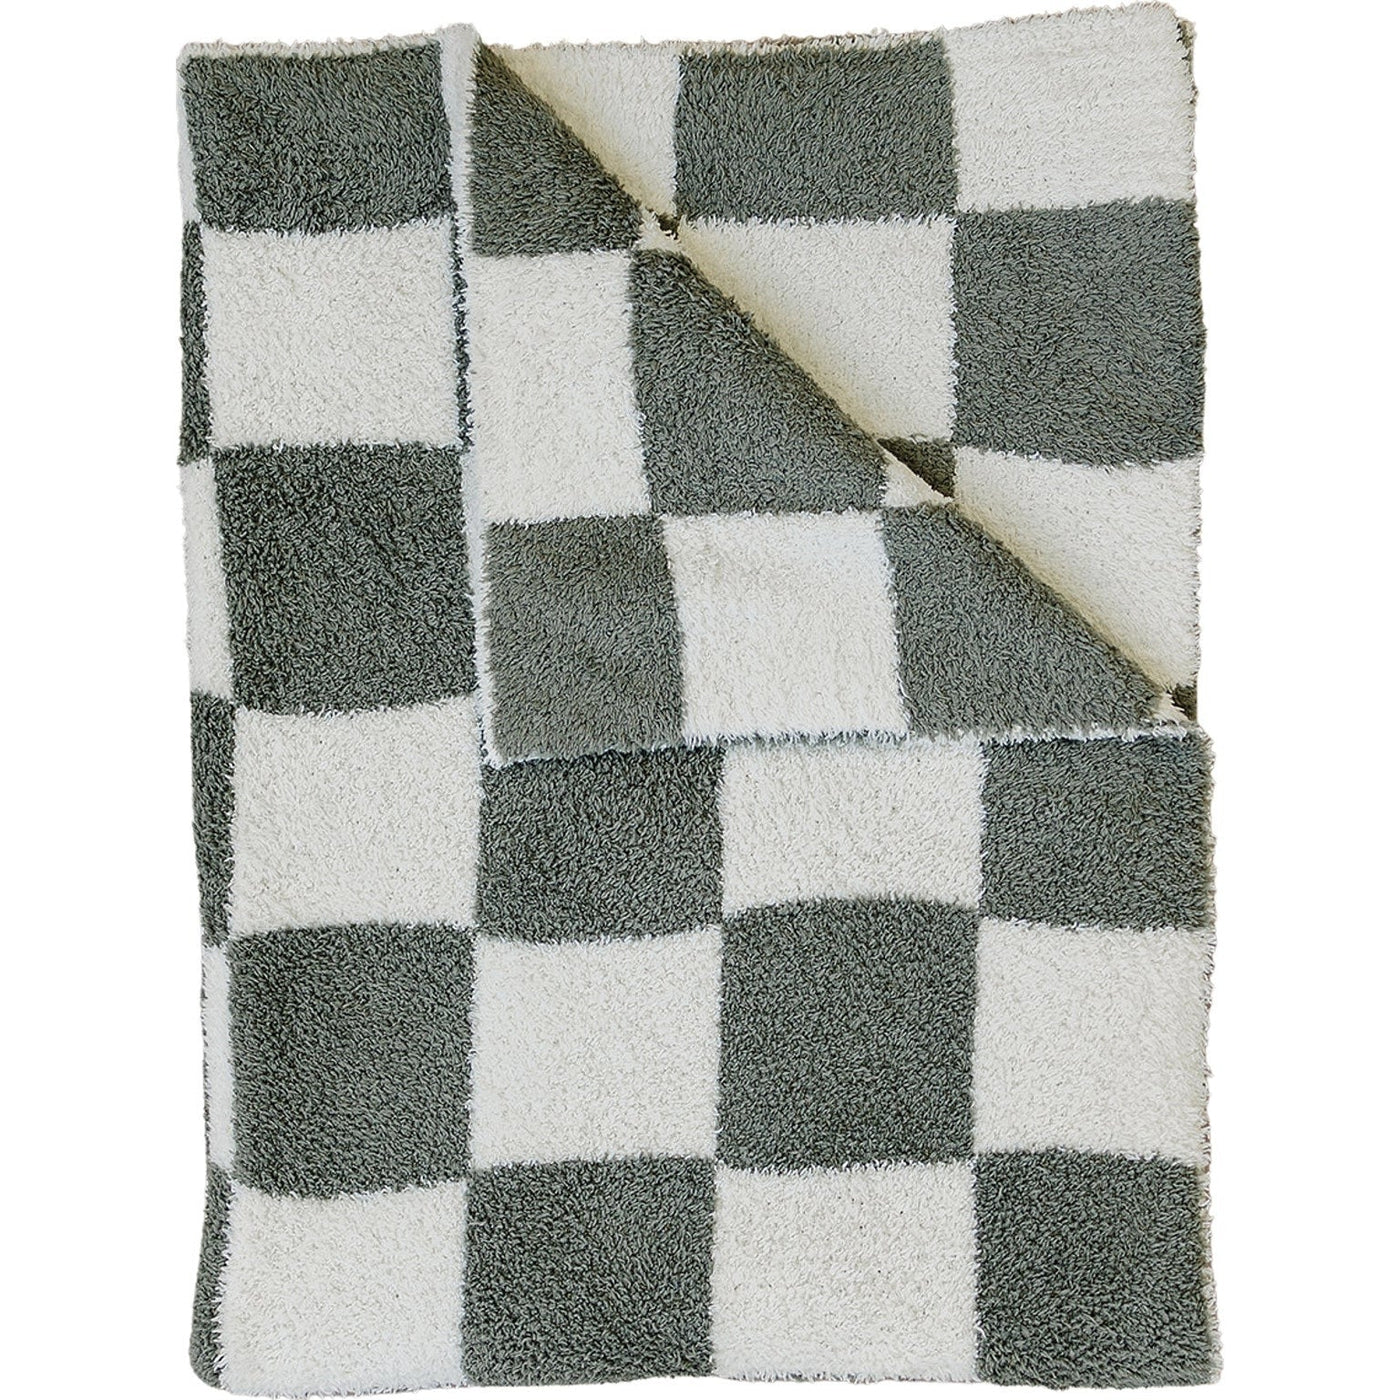 a black and white checkered blanket